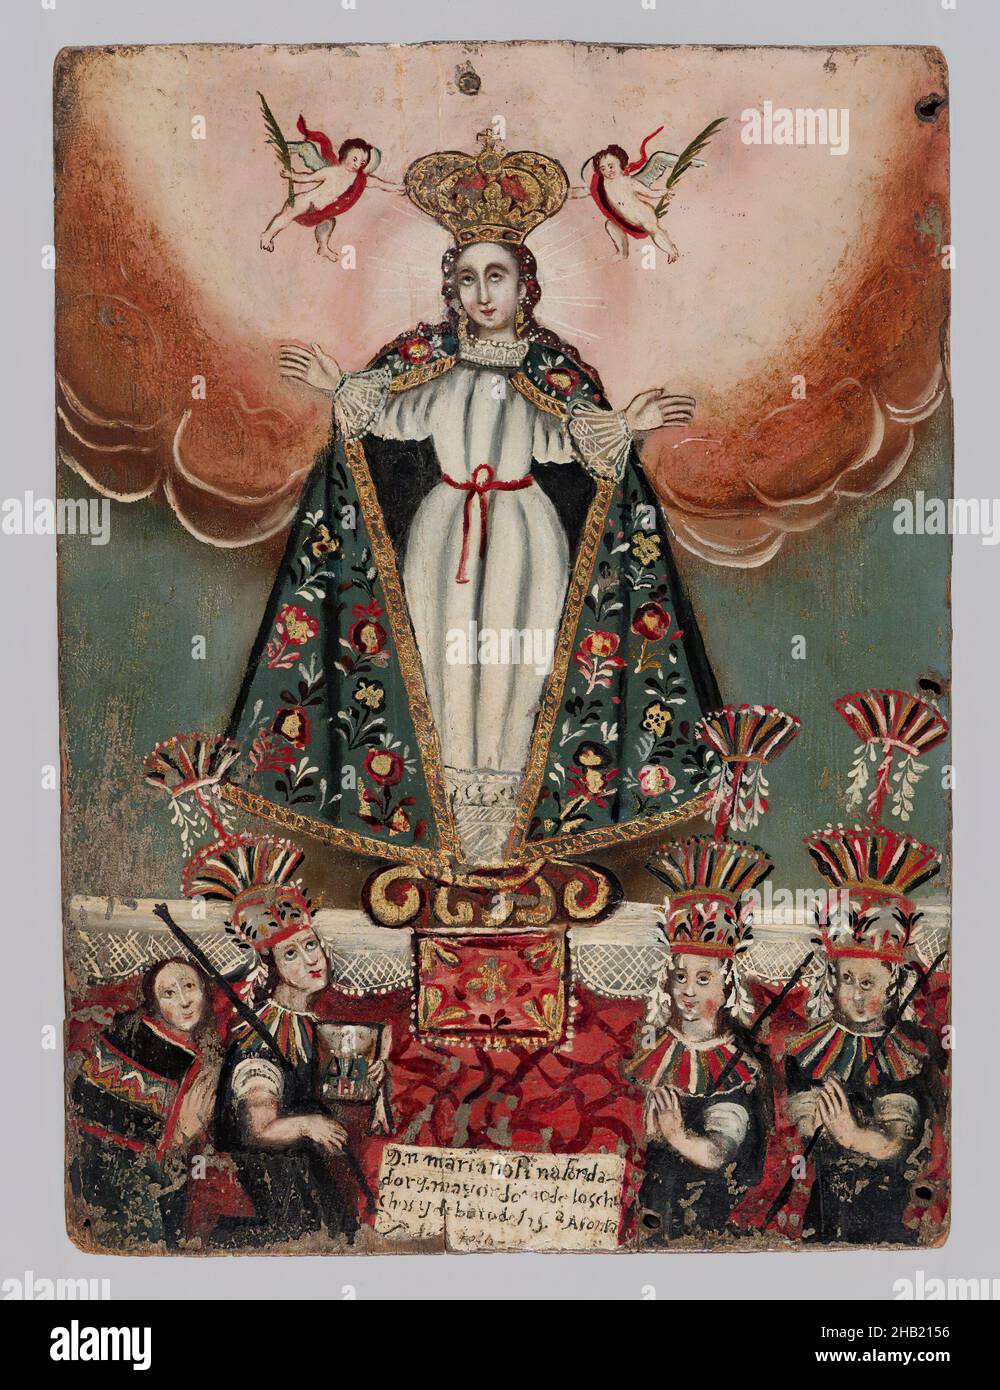 The Virgin Mary with Indian Donors, Oil on wood panel, La Paz, Bolivia, 1752, panel: 10 1/4 x 7 9/16 x 3/8 in., 26 x 19.2 x 1 cm, 18thC, bolivian art, catholic, catholicism, hispanic heritage, latin american art, mary, religious, religious art, south america, spanish american art, spanish colonial, virgin mary, x-ray Stock Photo